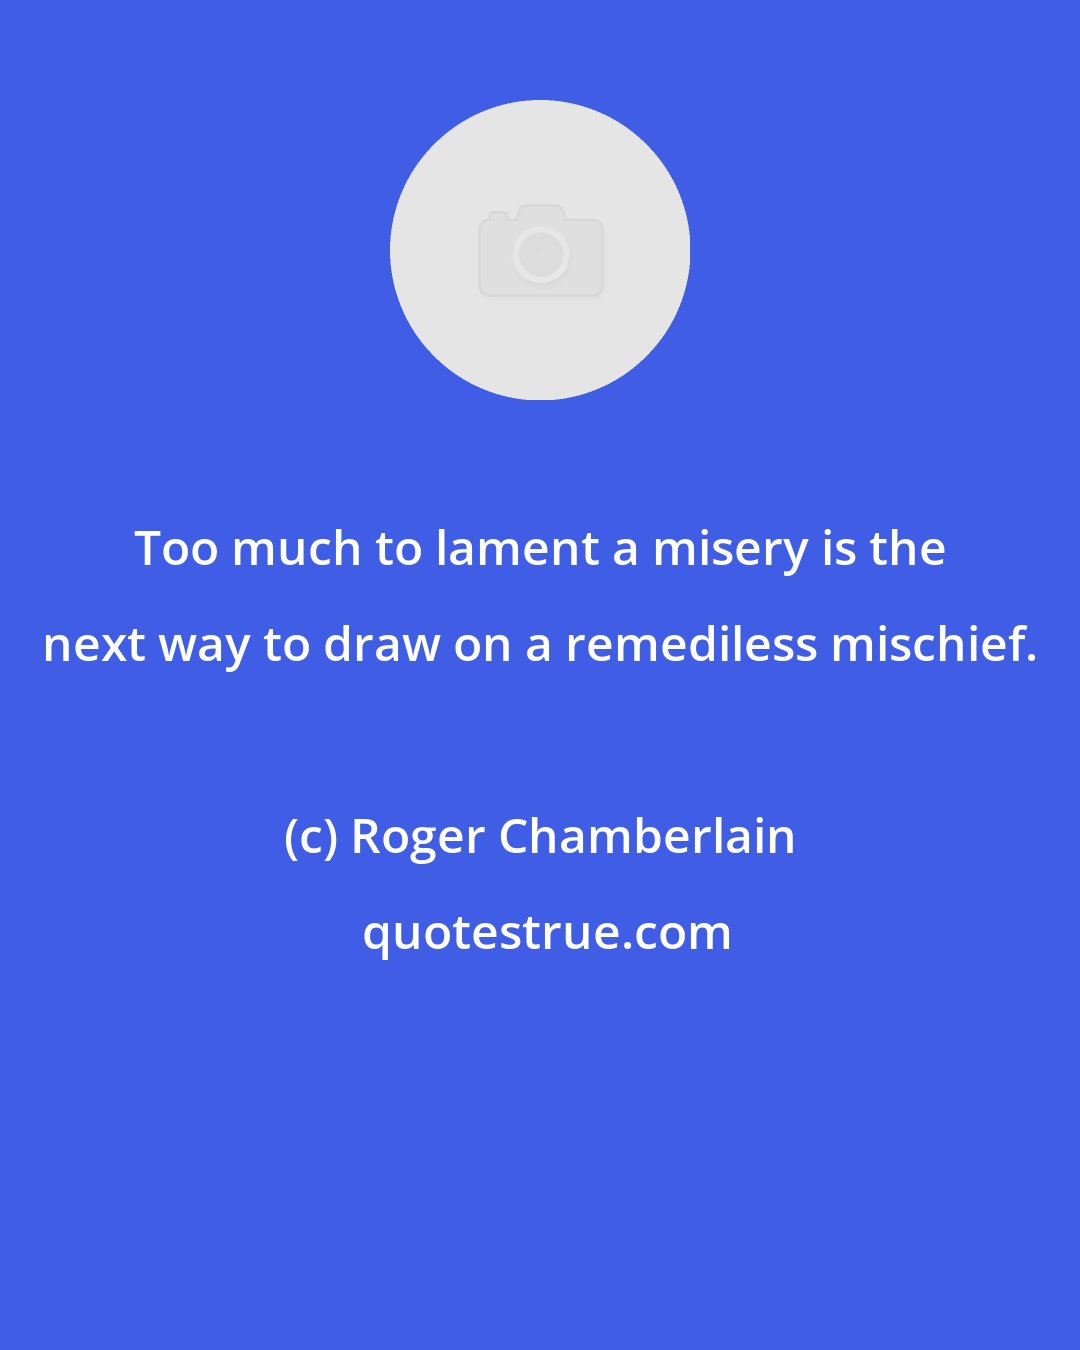 Roger Chamberlain: Too much to lament a misery is the next way to draw on a remediless mischief.